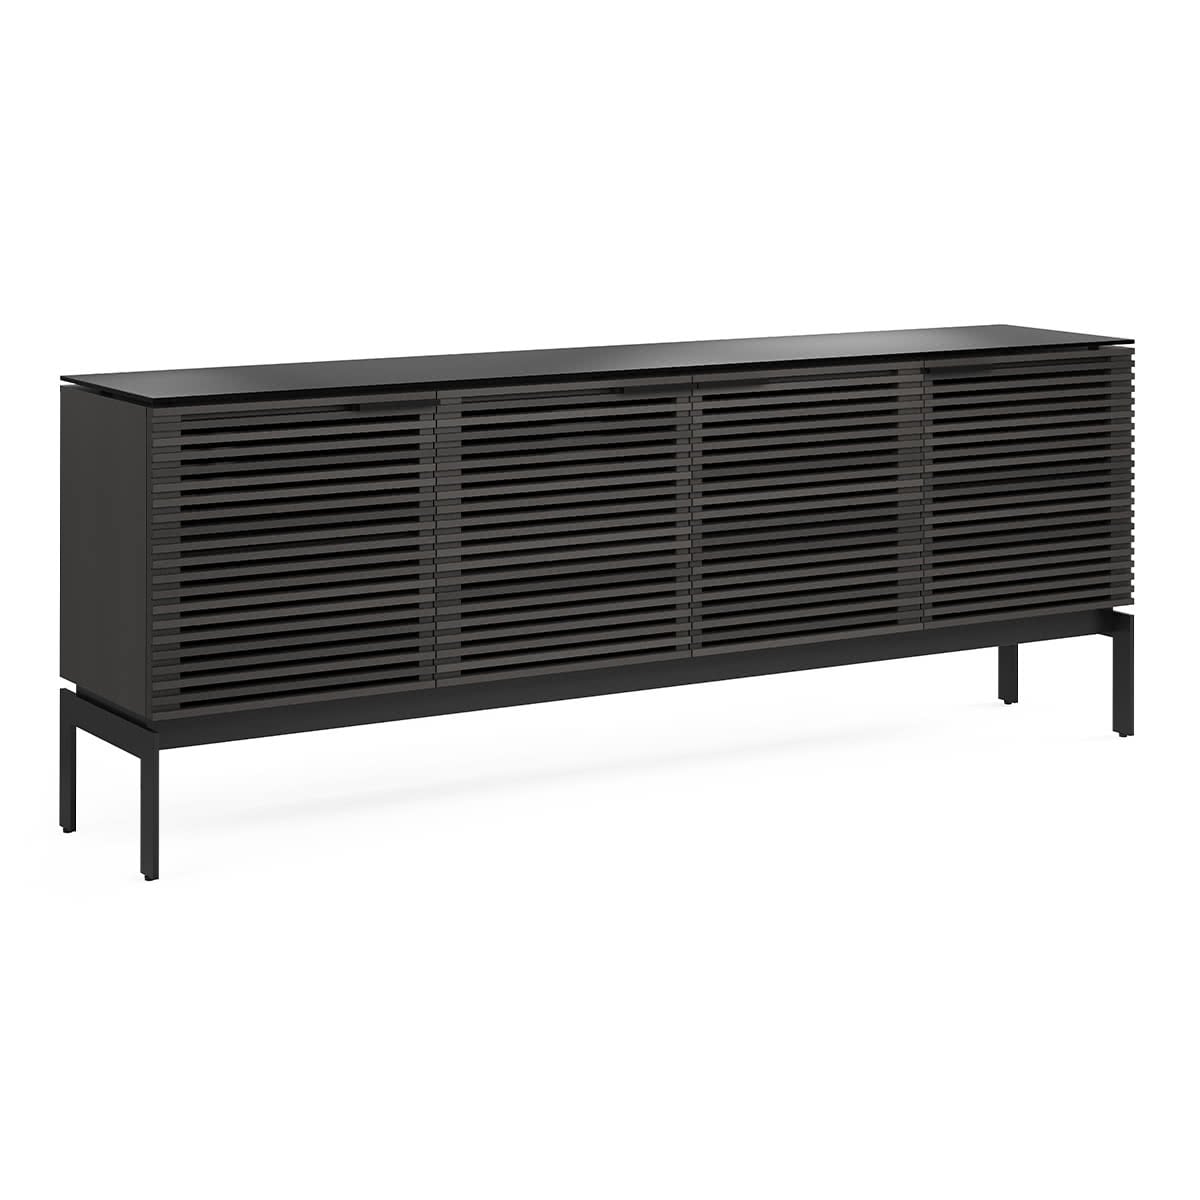 BDI Corridor SV 7129 Storage Console (Charcoal Stained Ash)